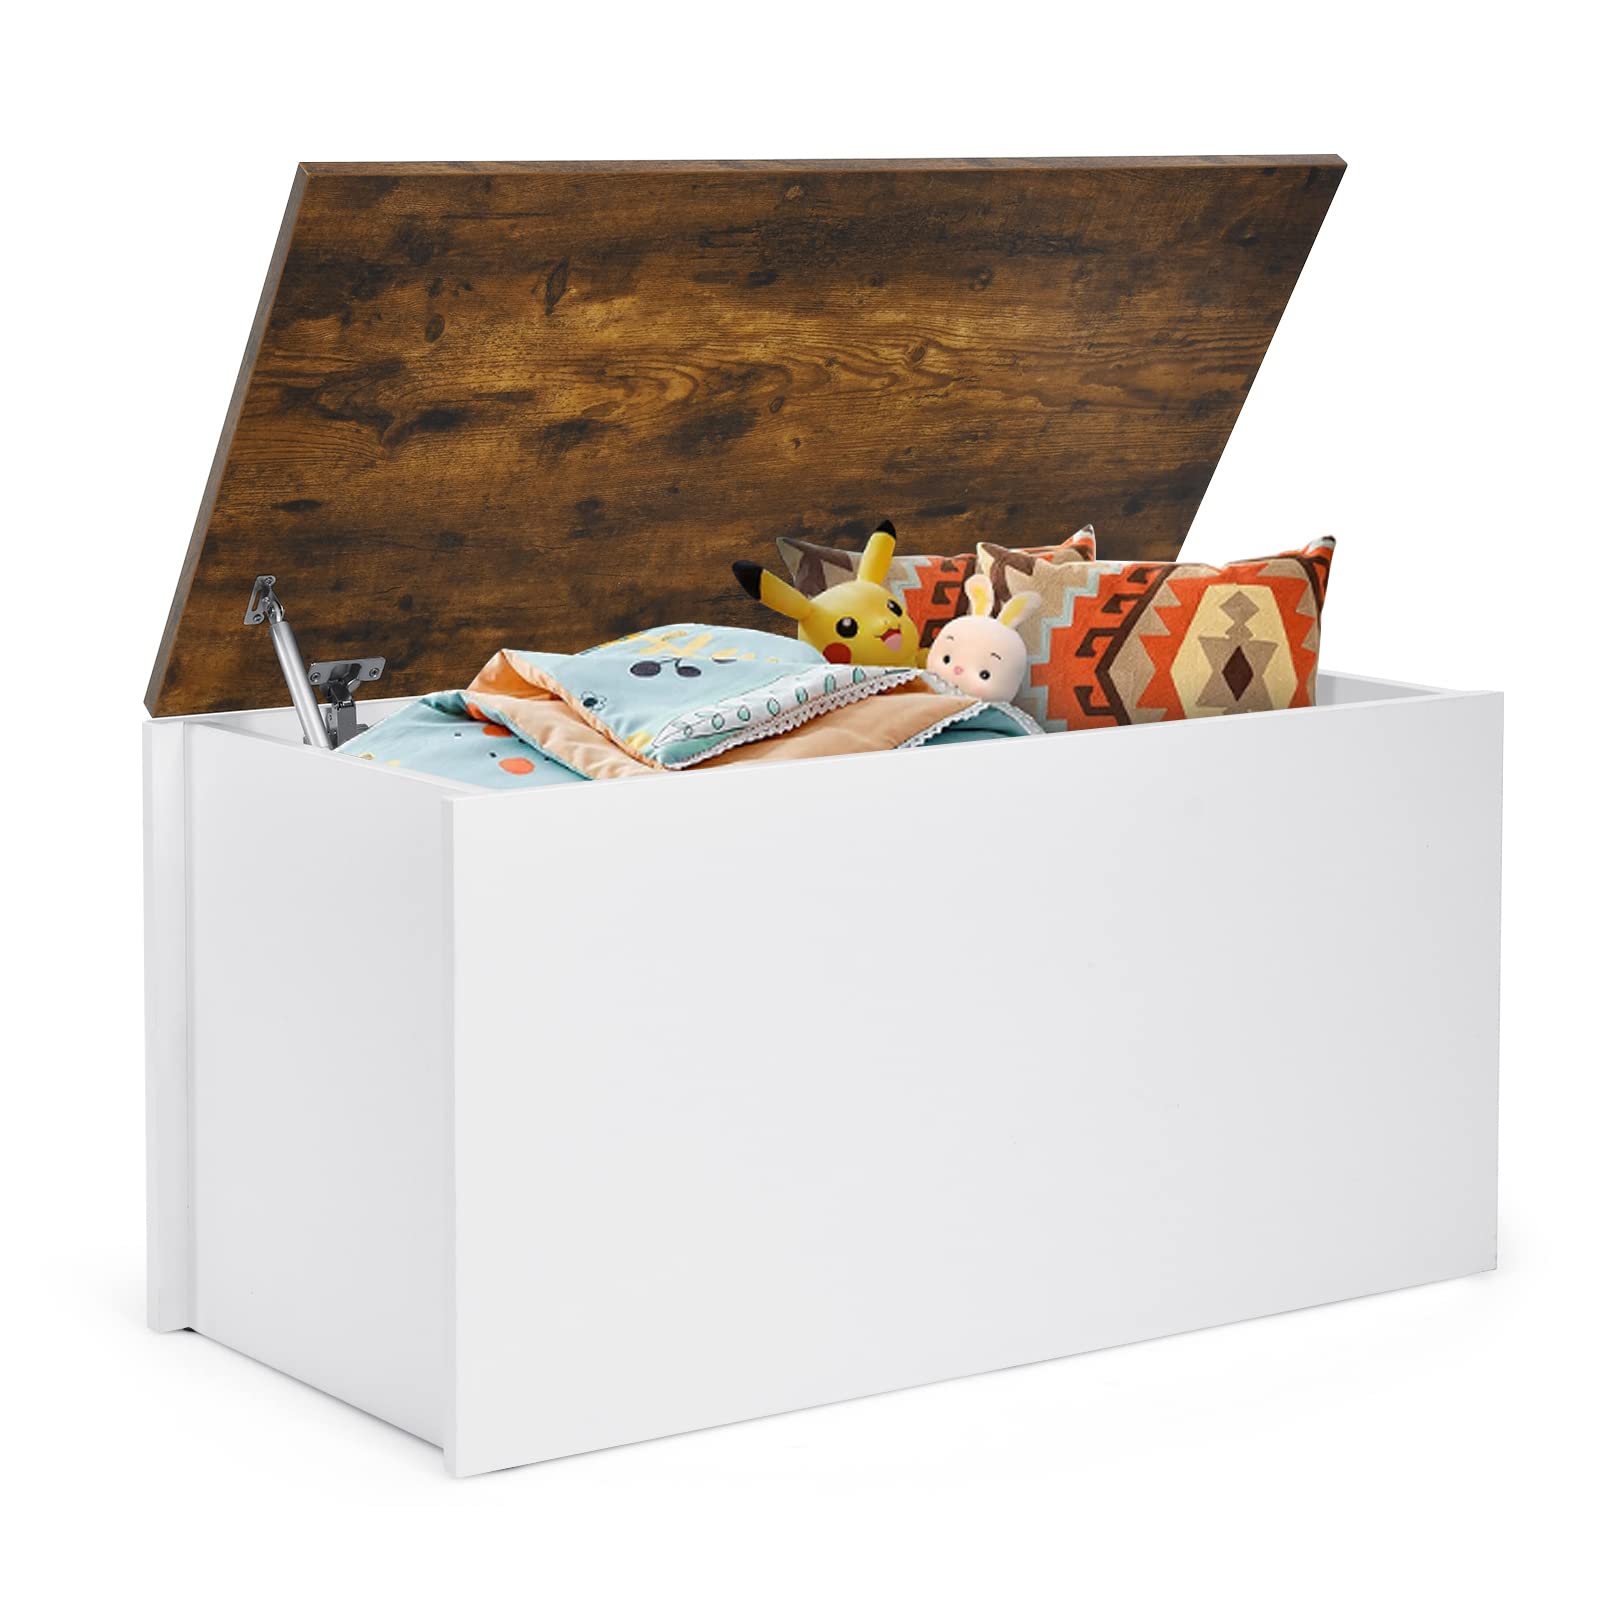 Giantex Flip-top Storage Chest, Lift Top Storage Bench w/Pneumatic Rod & Safety Hinges